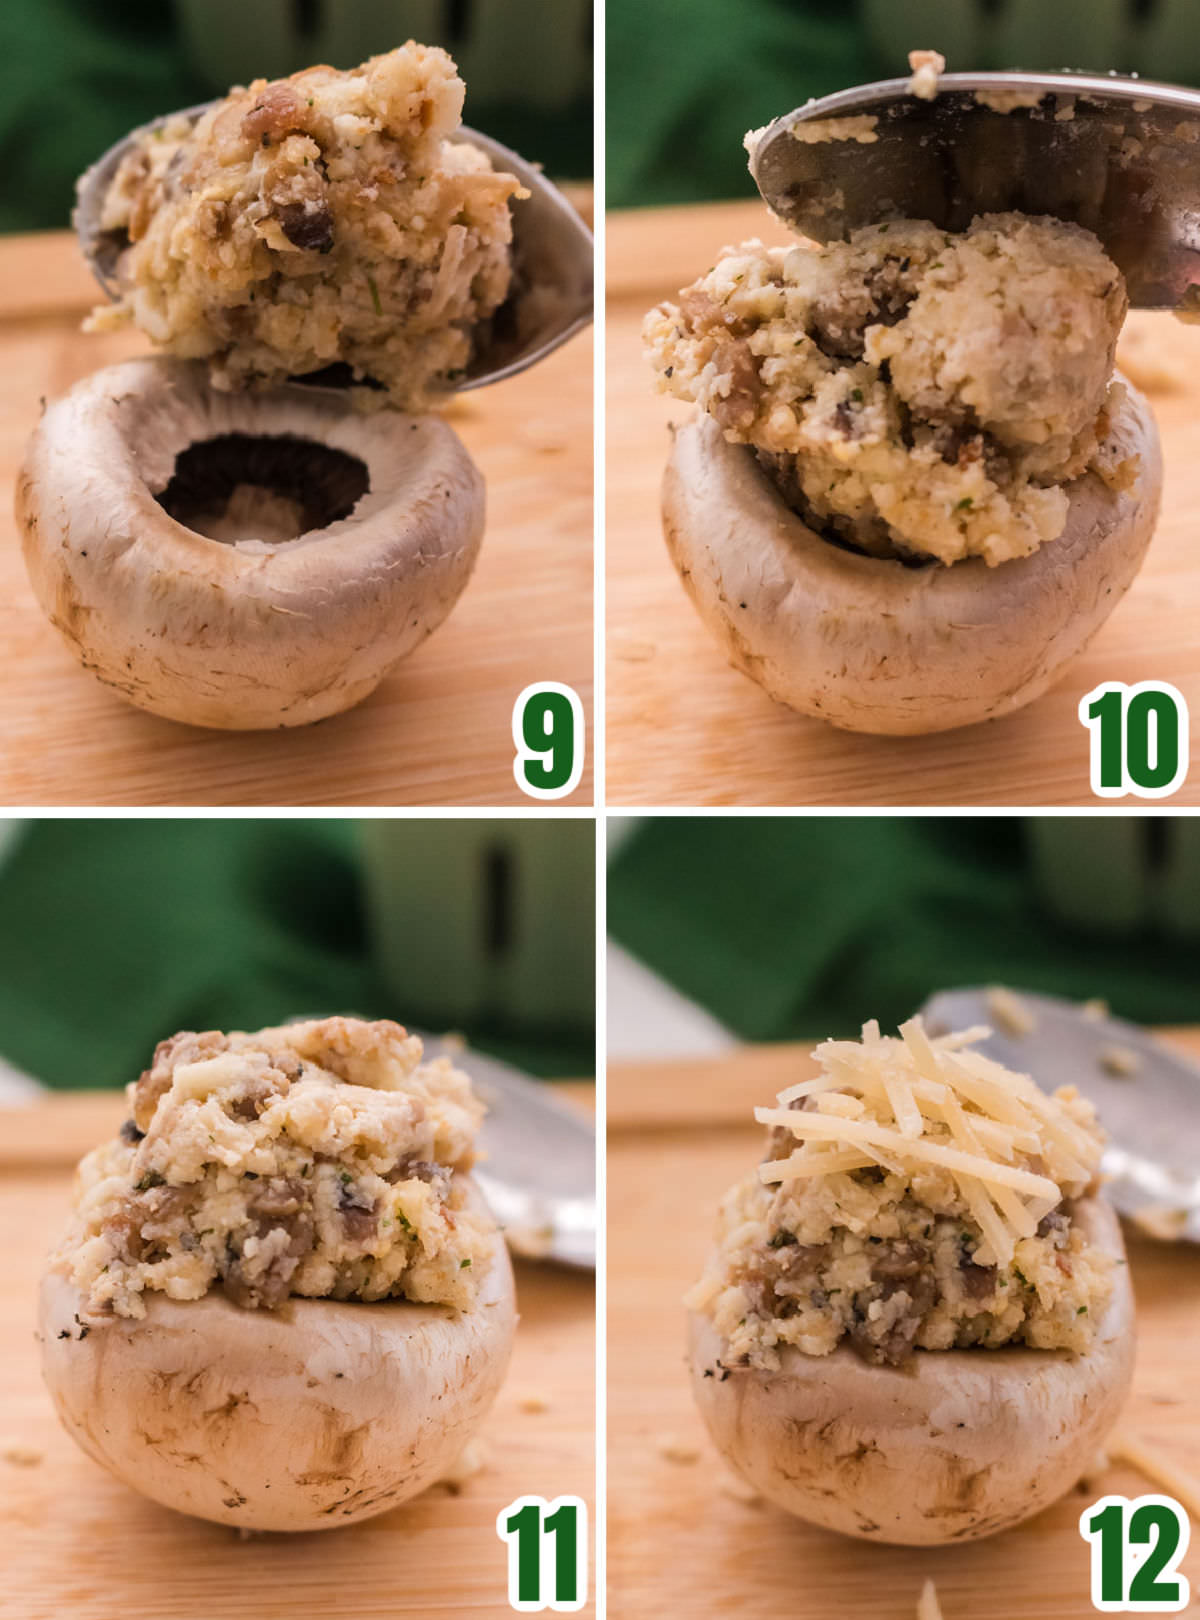 Collage image showing the steps for stuffing the mushroom cap with the sausage mixture.